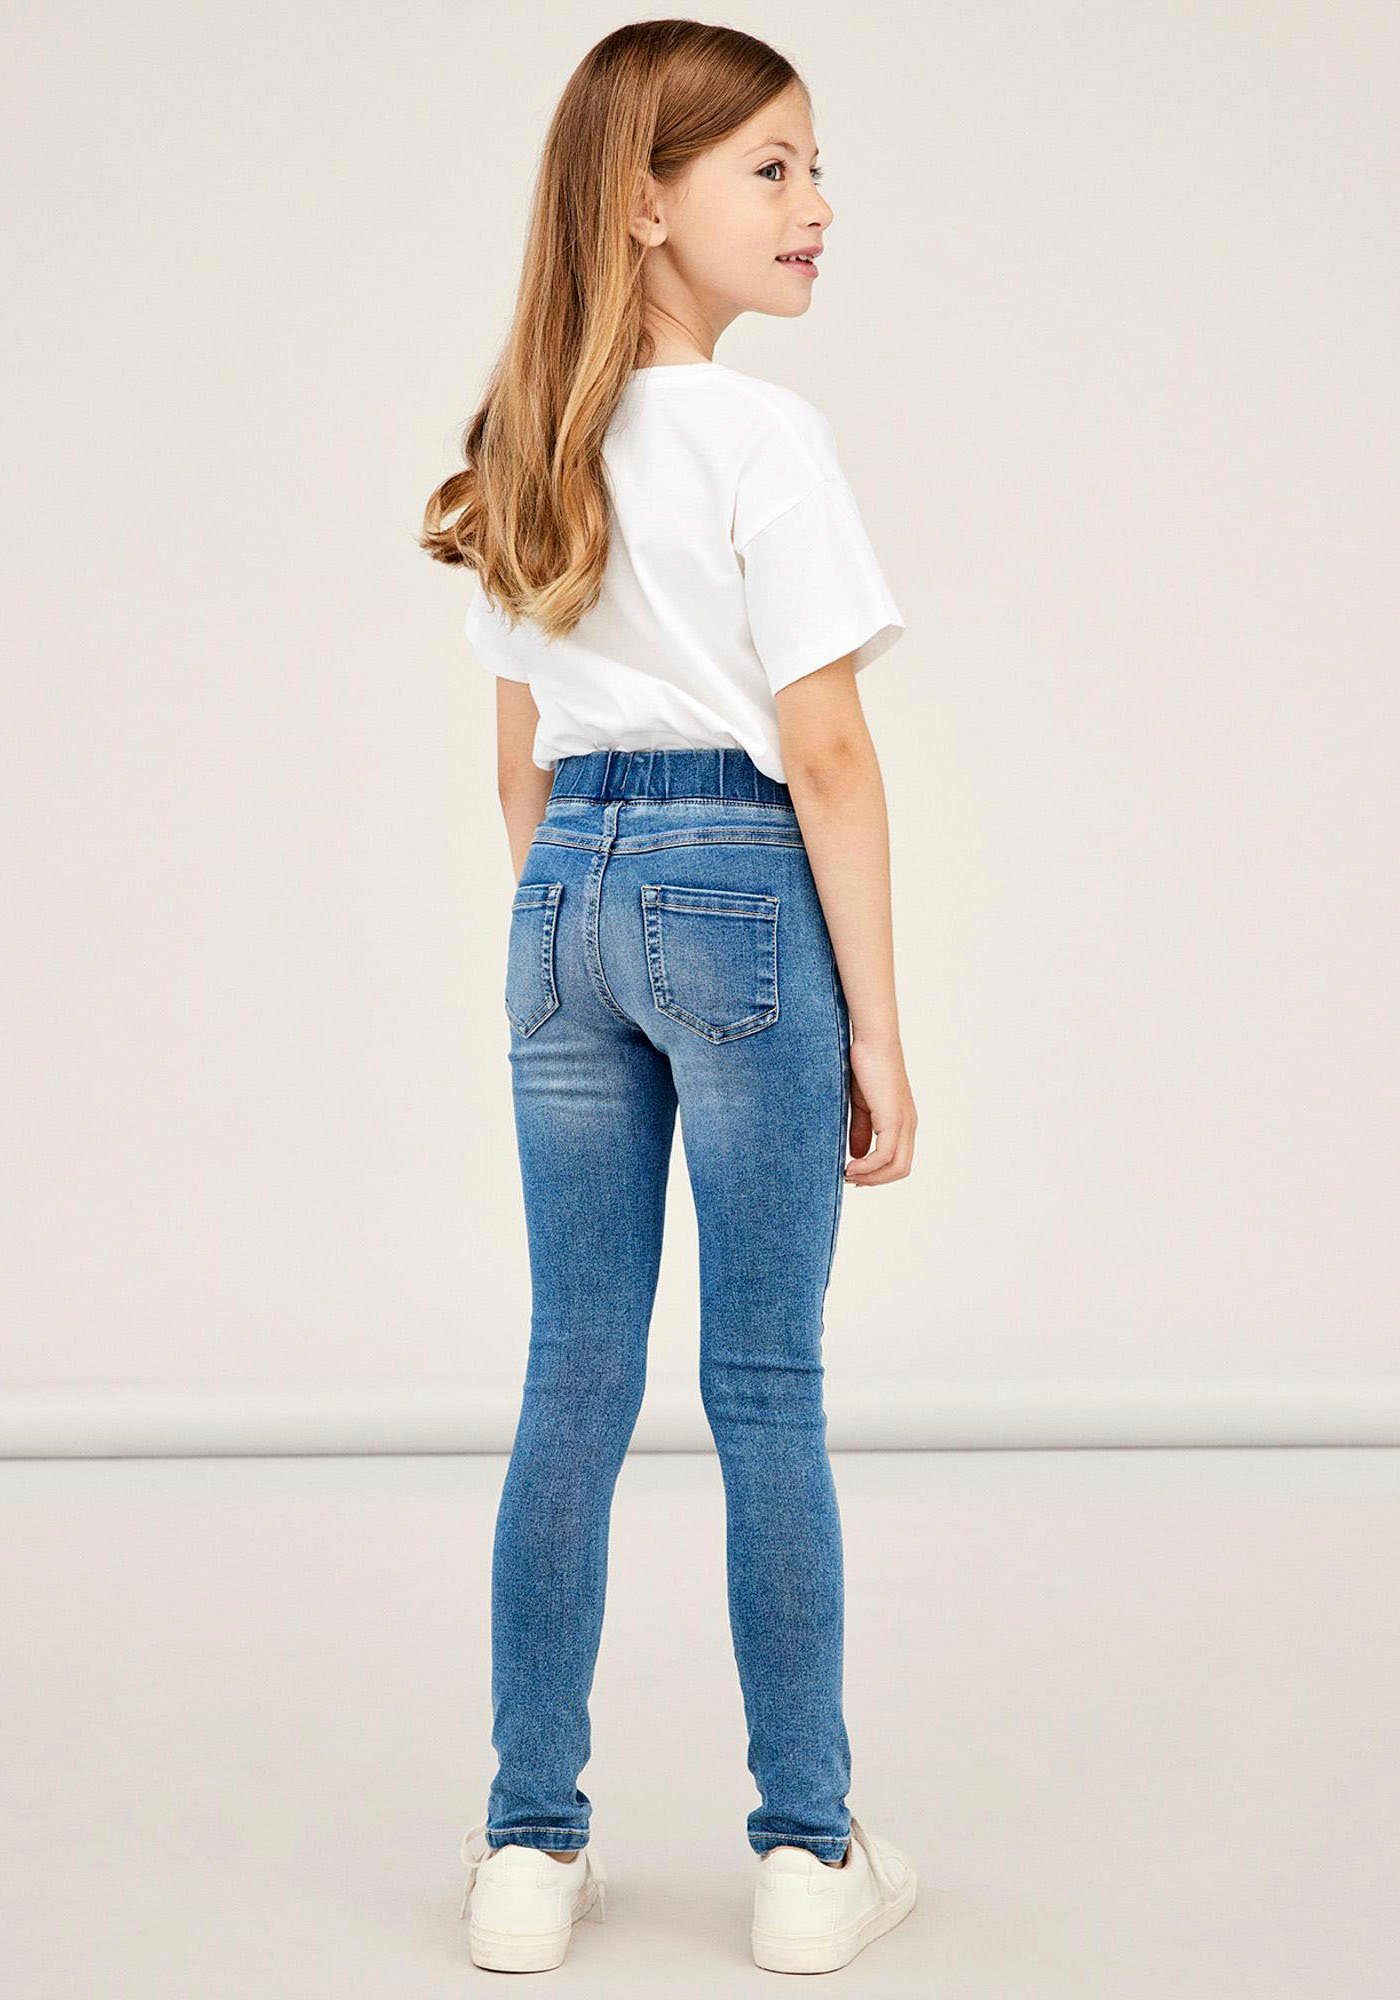 NKFPOLLY, Mädchen It name Jeans für Name it Jeansjeggings